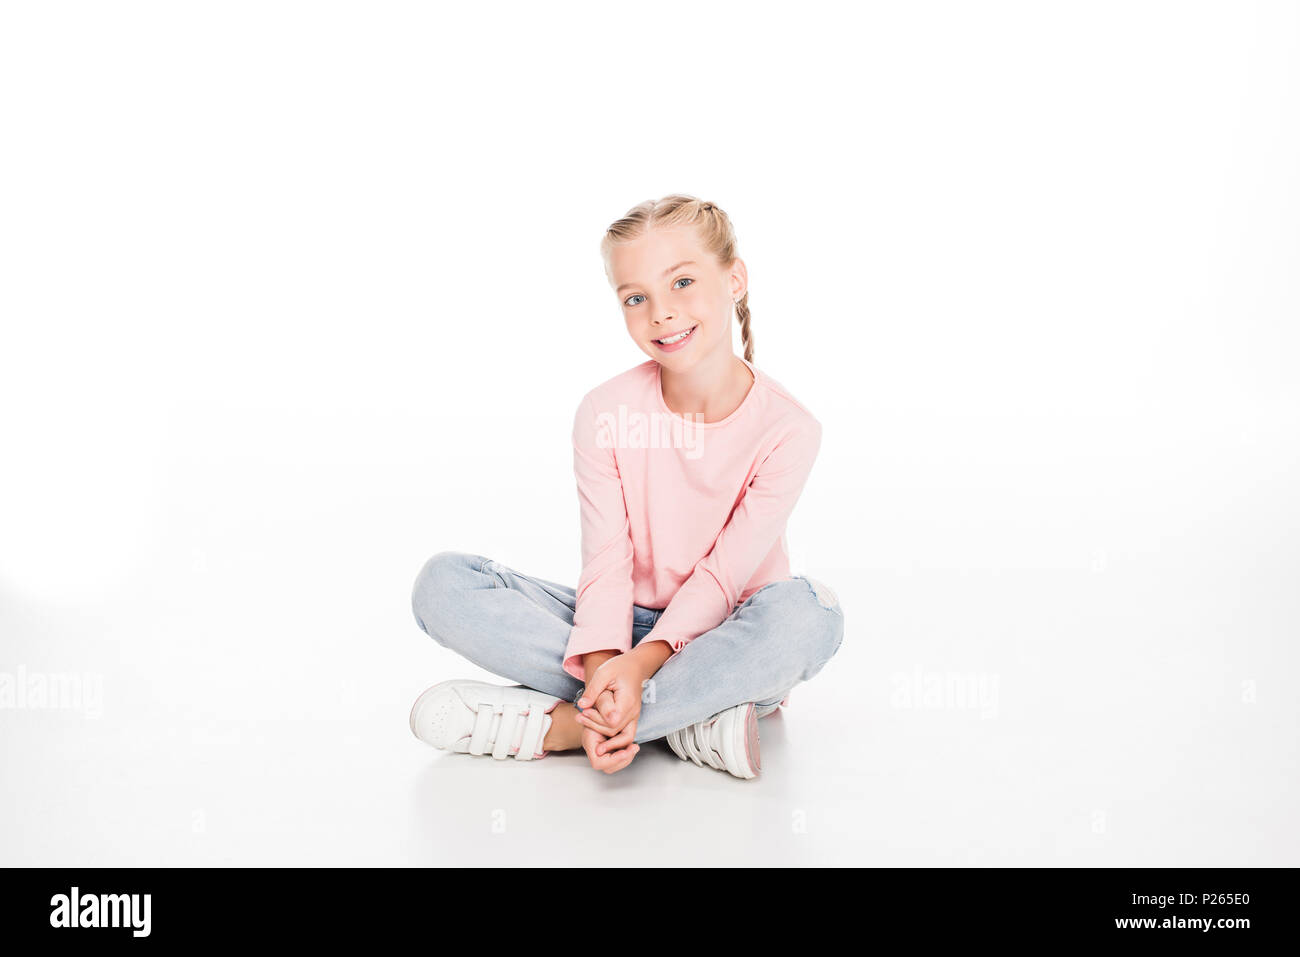 Cheerful child sitting on floor with legs crossed, isolated on white ...